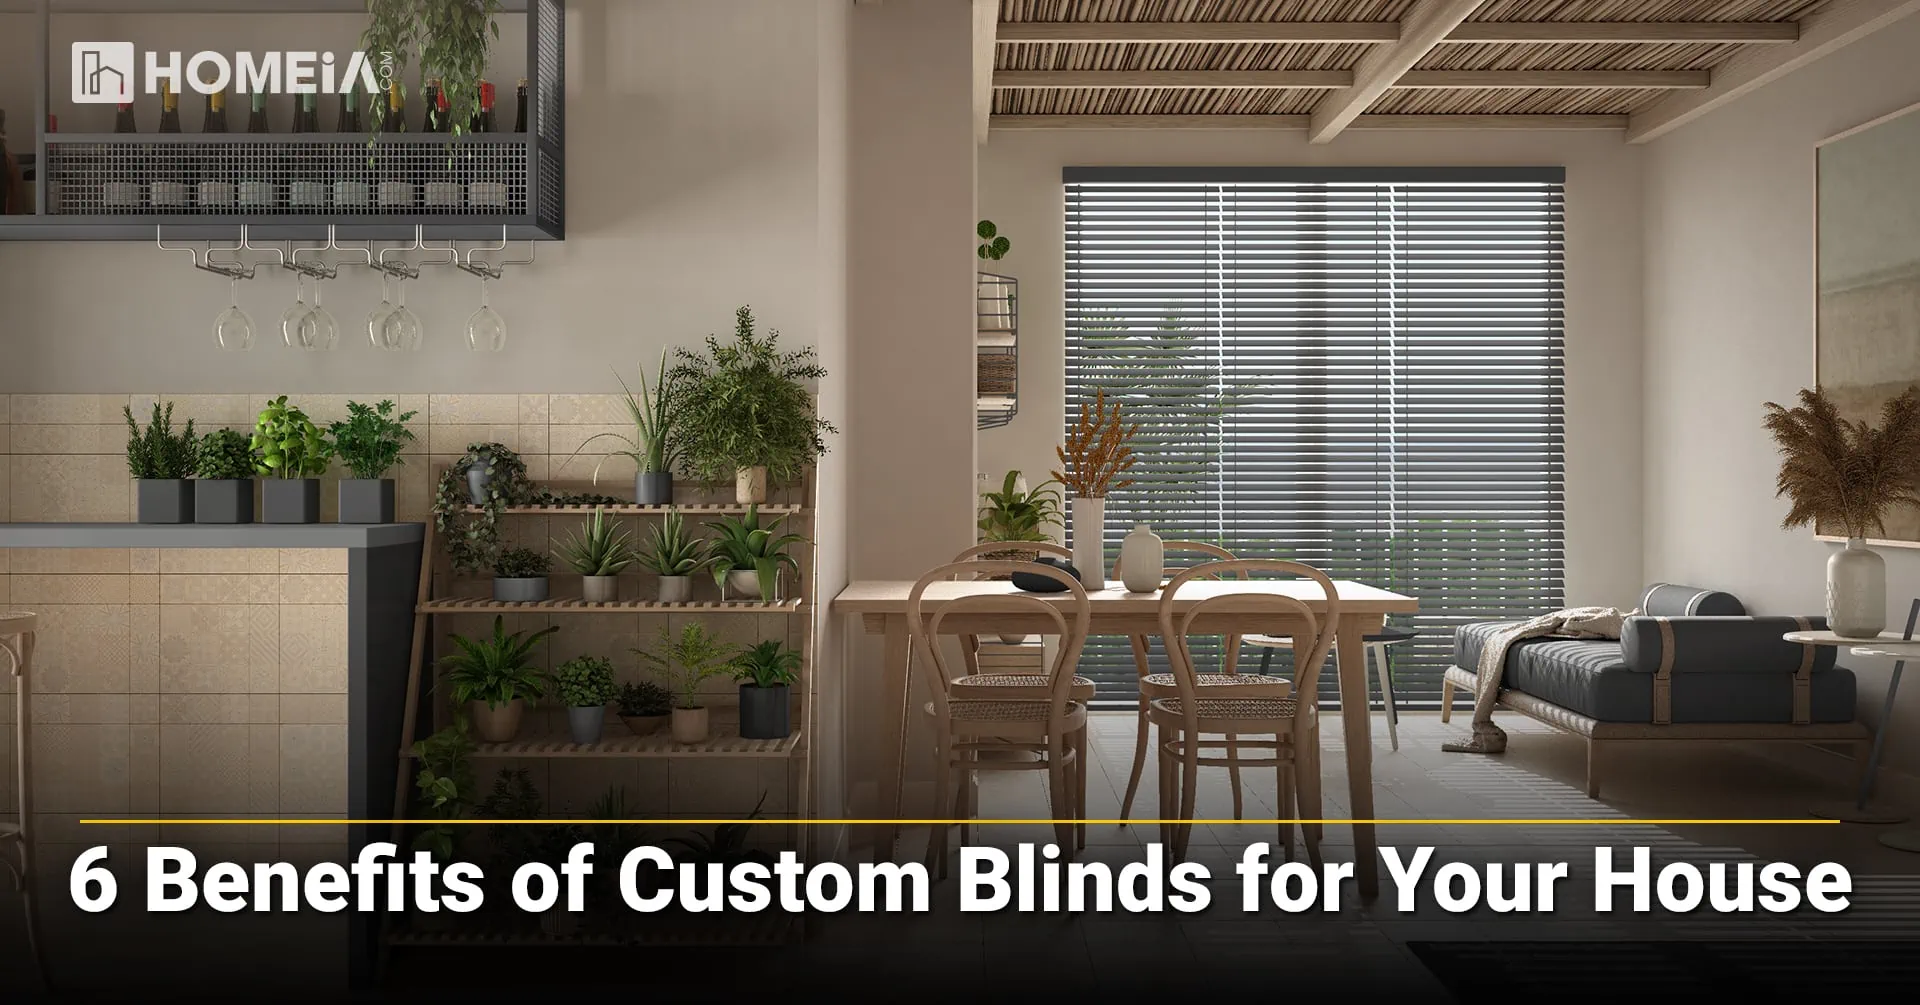 6 Benefits of Custom Blinds for Your House